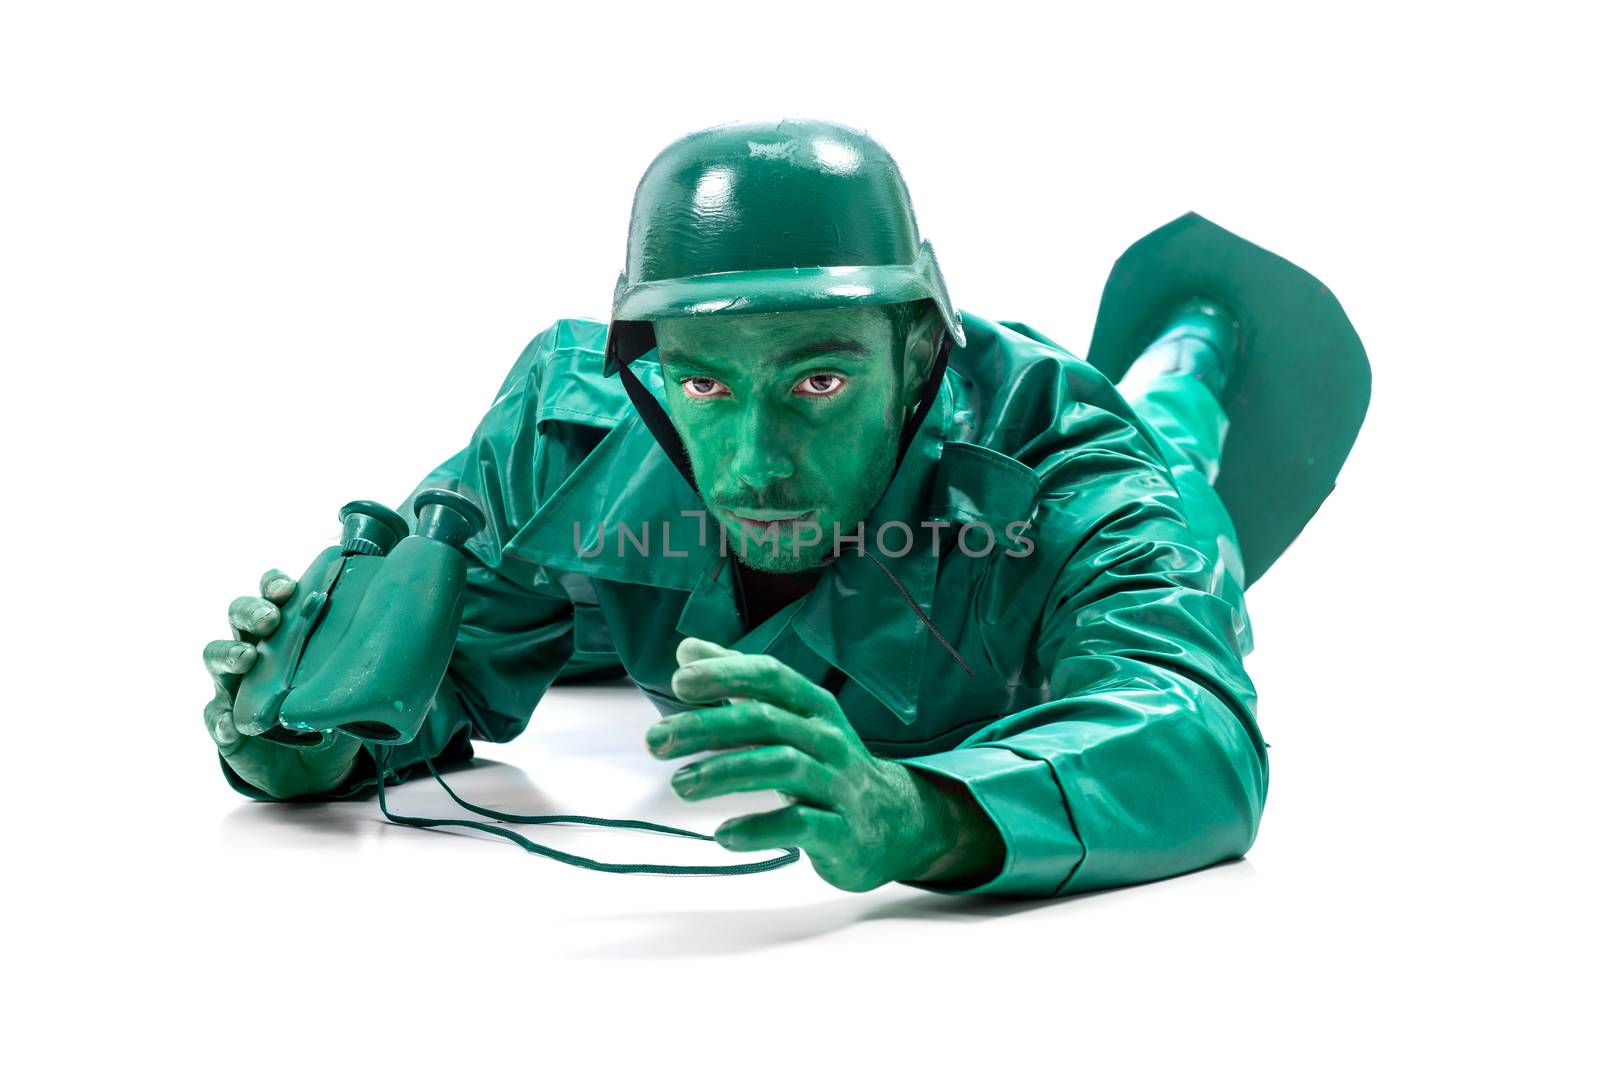 Man on a green toy soldier costume, crawling with binocolous isolated on white background.